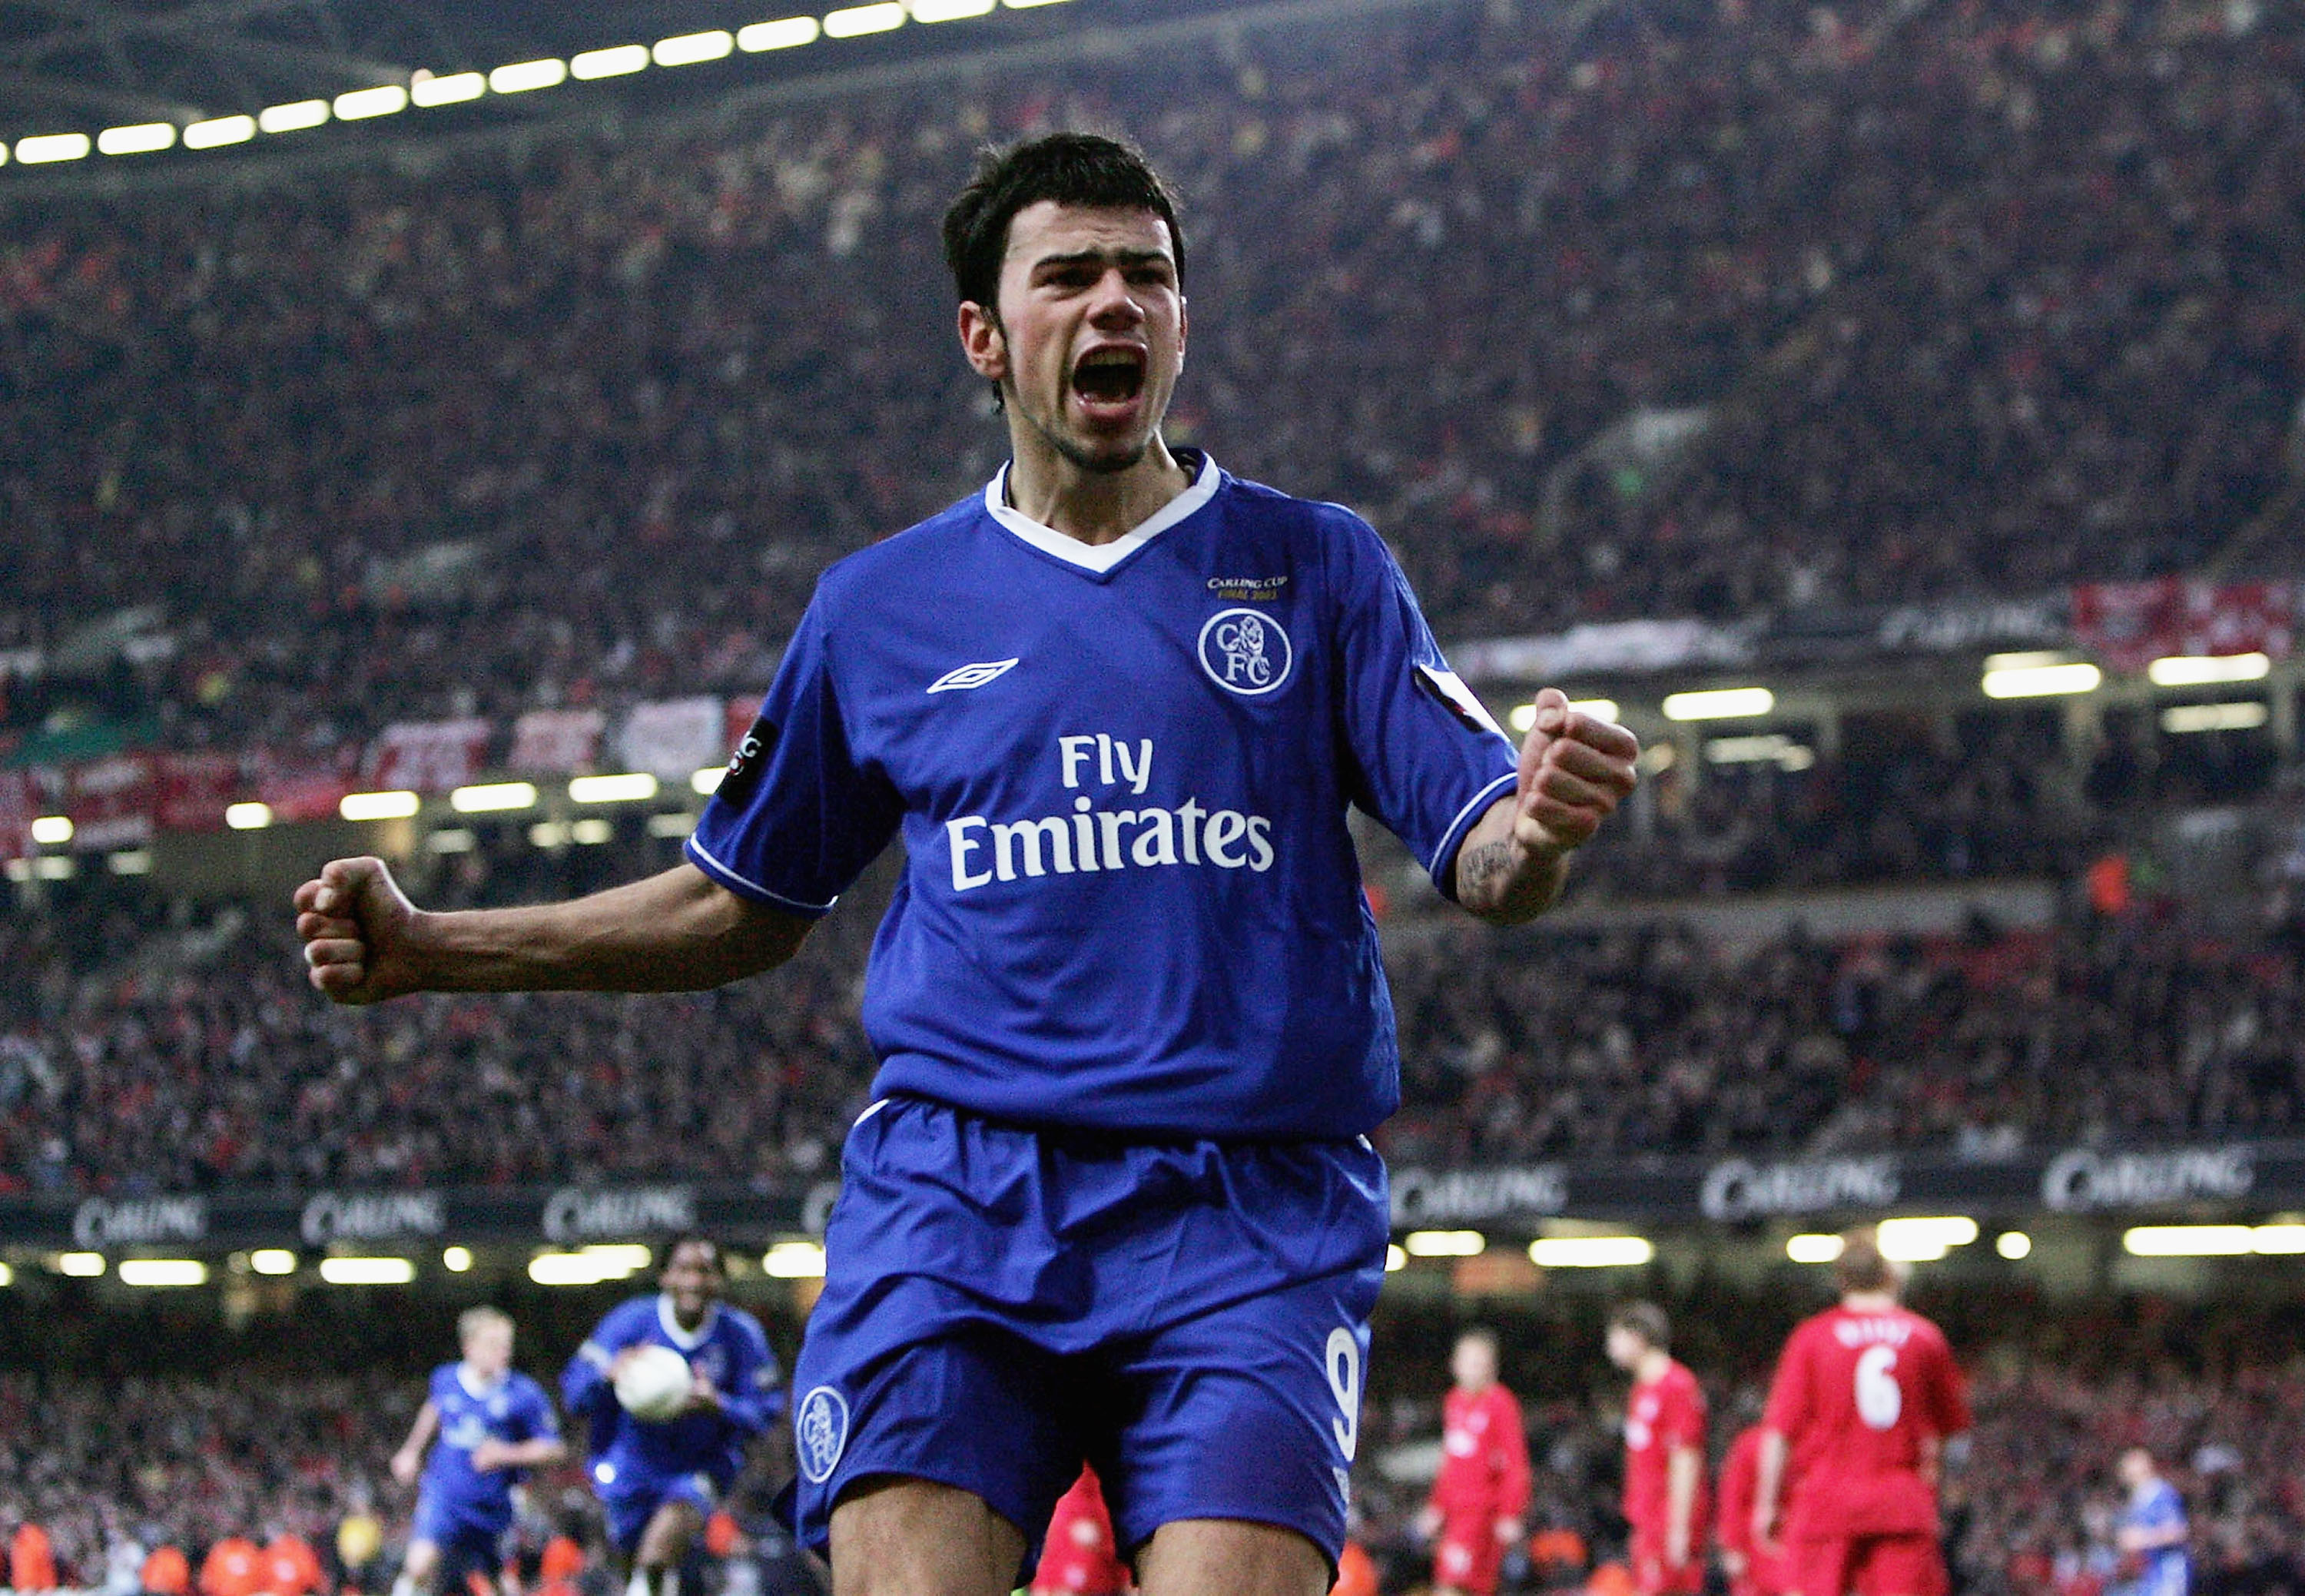 CARDIFF, UNITED KINGDOM - FEBRUARY 27: Mateja Kezman of Chelsea celebrates scoring their third and winning goal during the Carling Cup Final match between Chelsea and Liverpool at the Millennium Stadium on February 27, 2005 in Cardiff, Wales.  (Photo by B